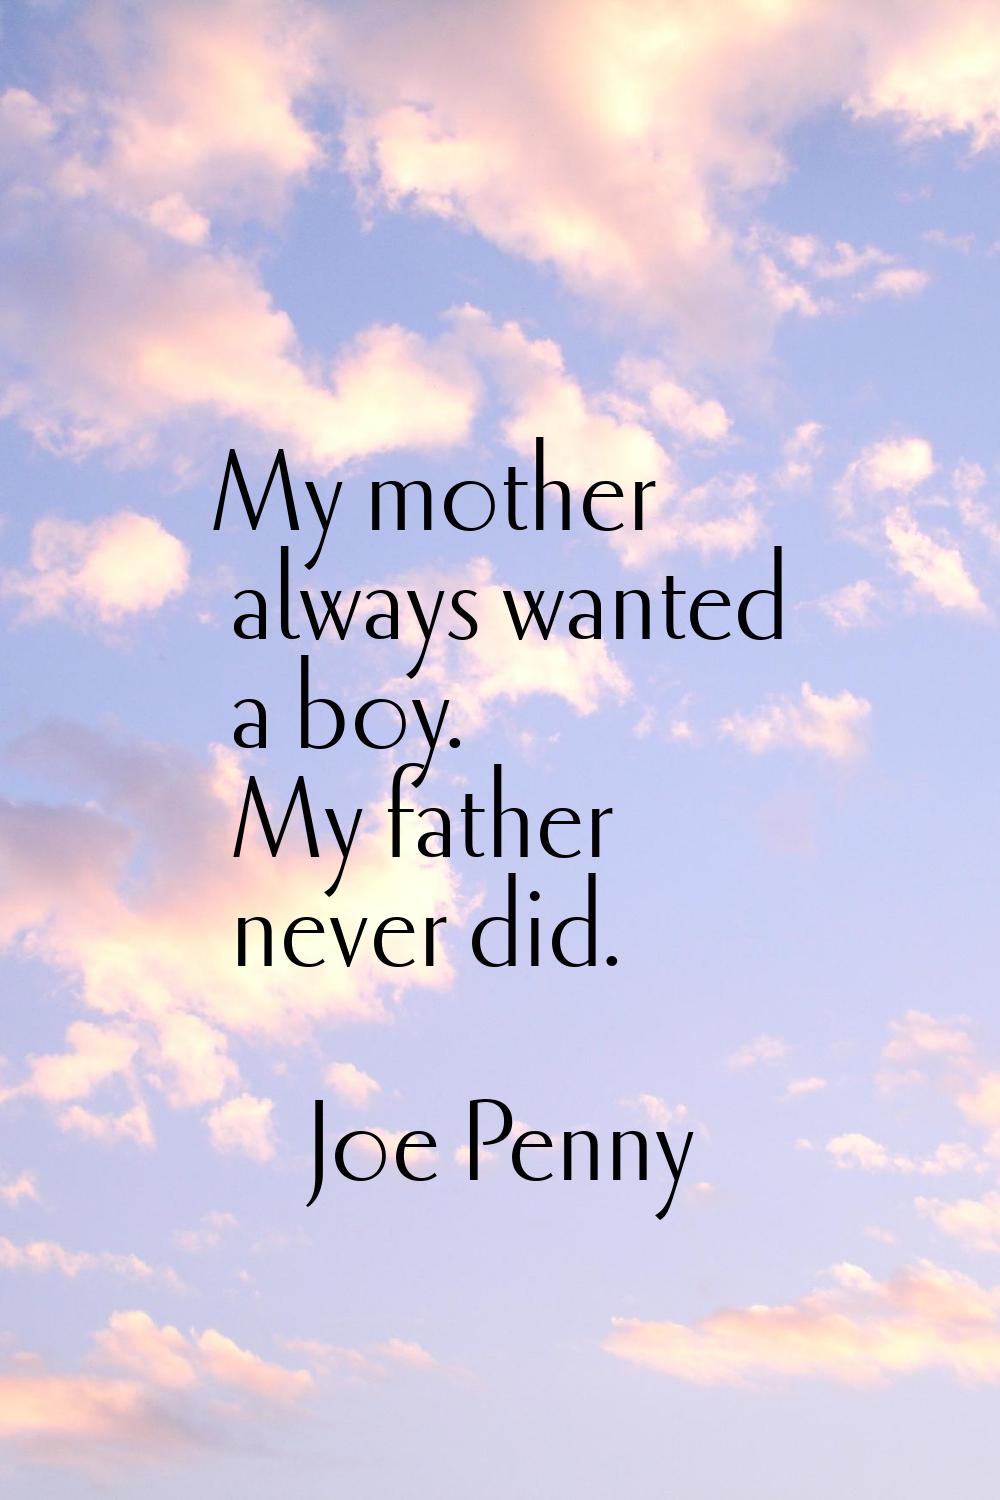 My mother always wanted a boy. My father never did.